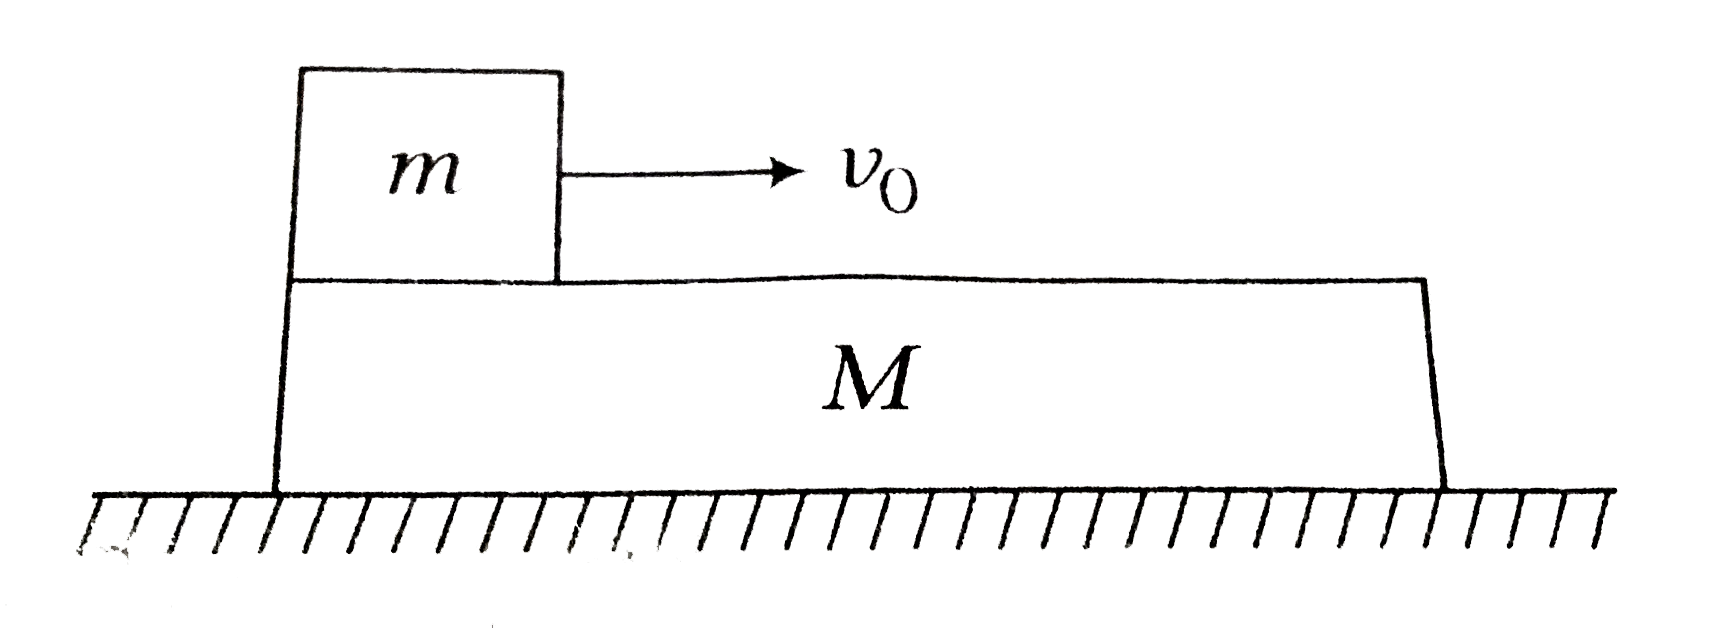 The coefficient of friction between the block and plank is mu and its value is such that block becomes stationary with respect to plank before it reaches the other end. Then which of the following is not correct.